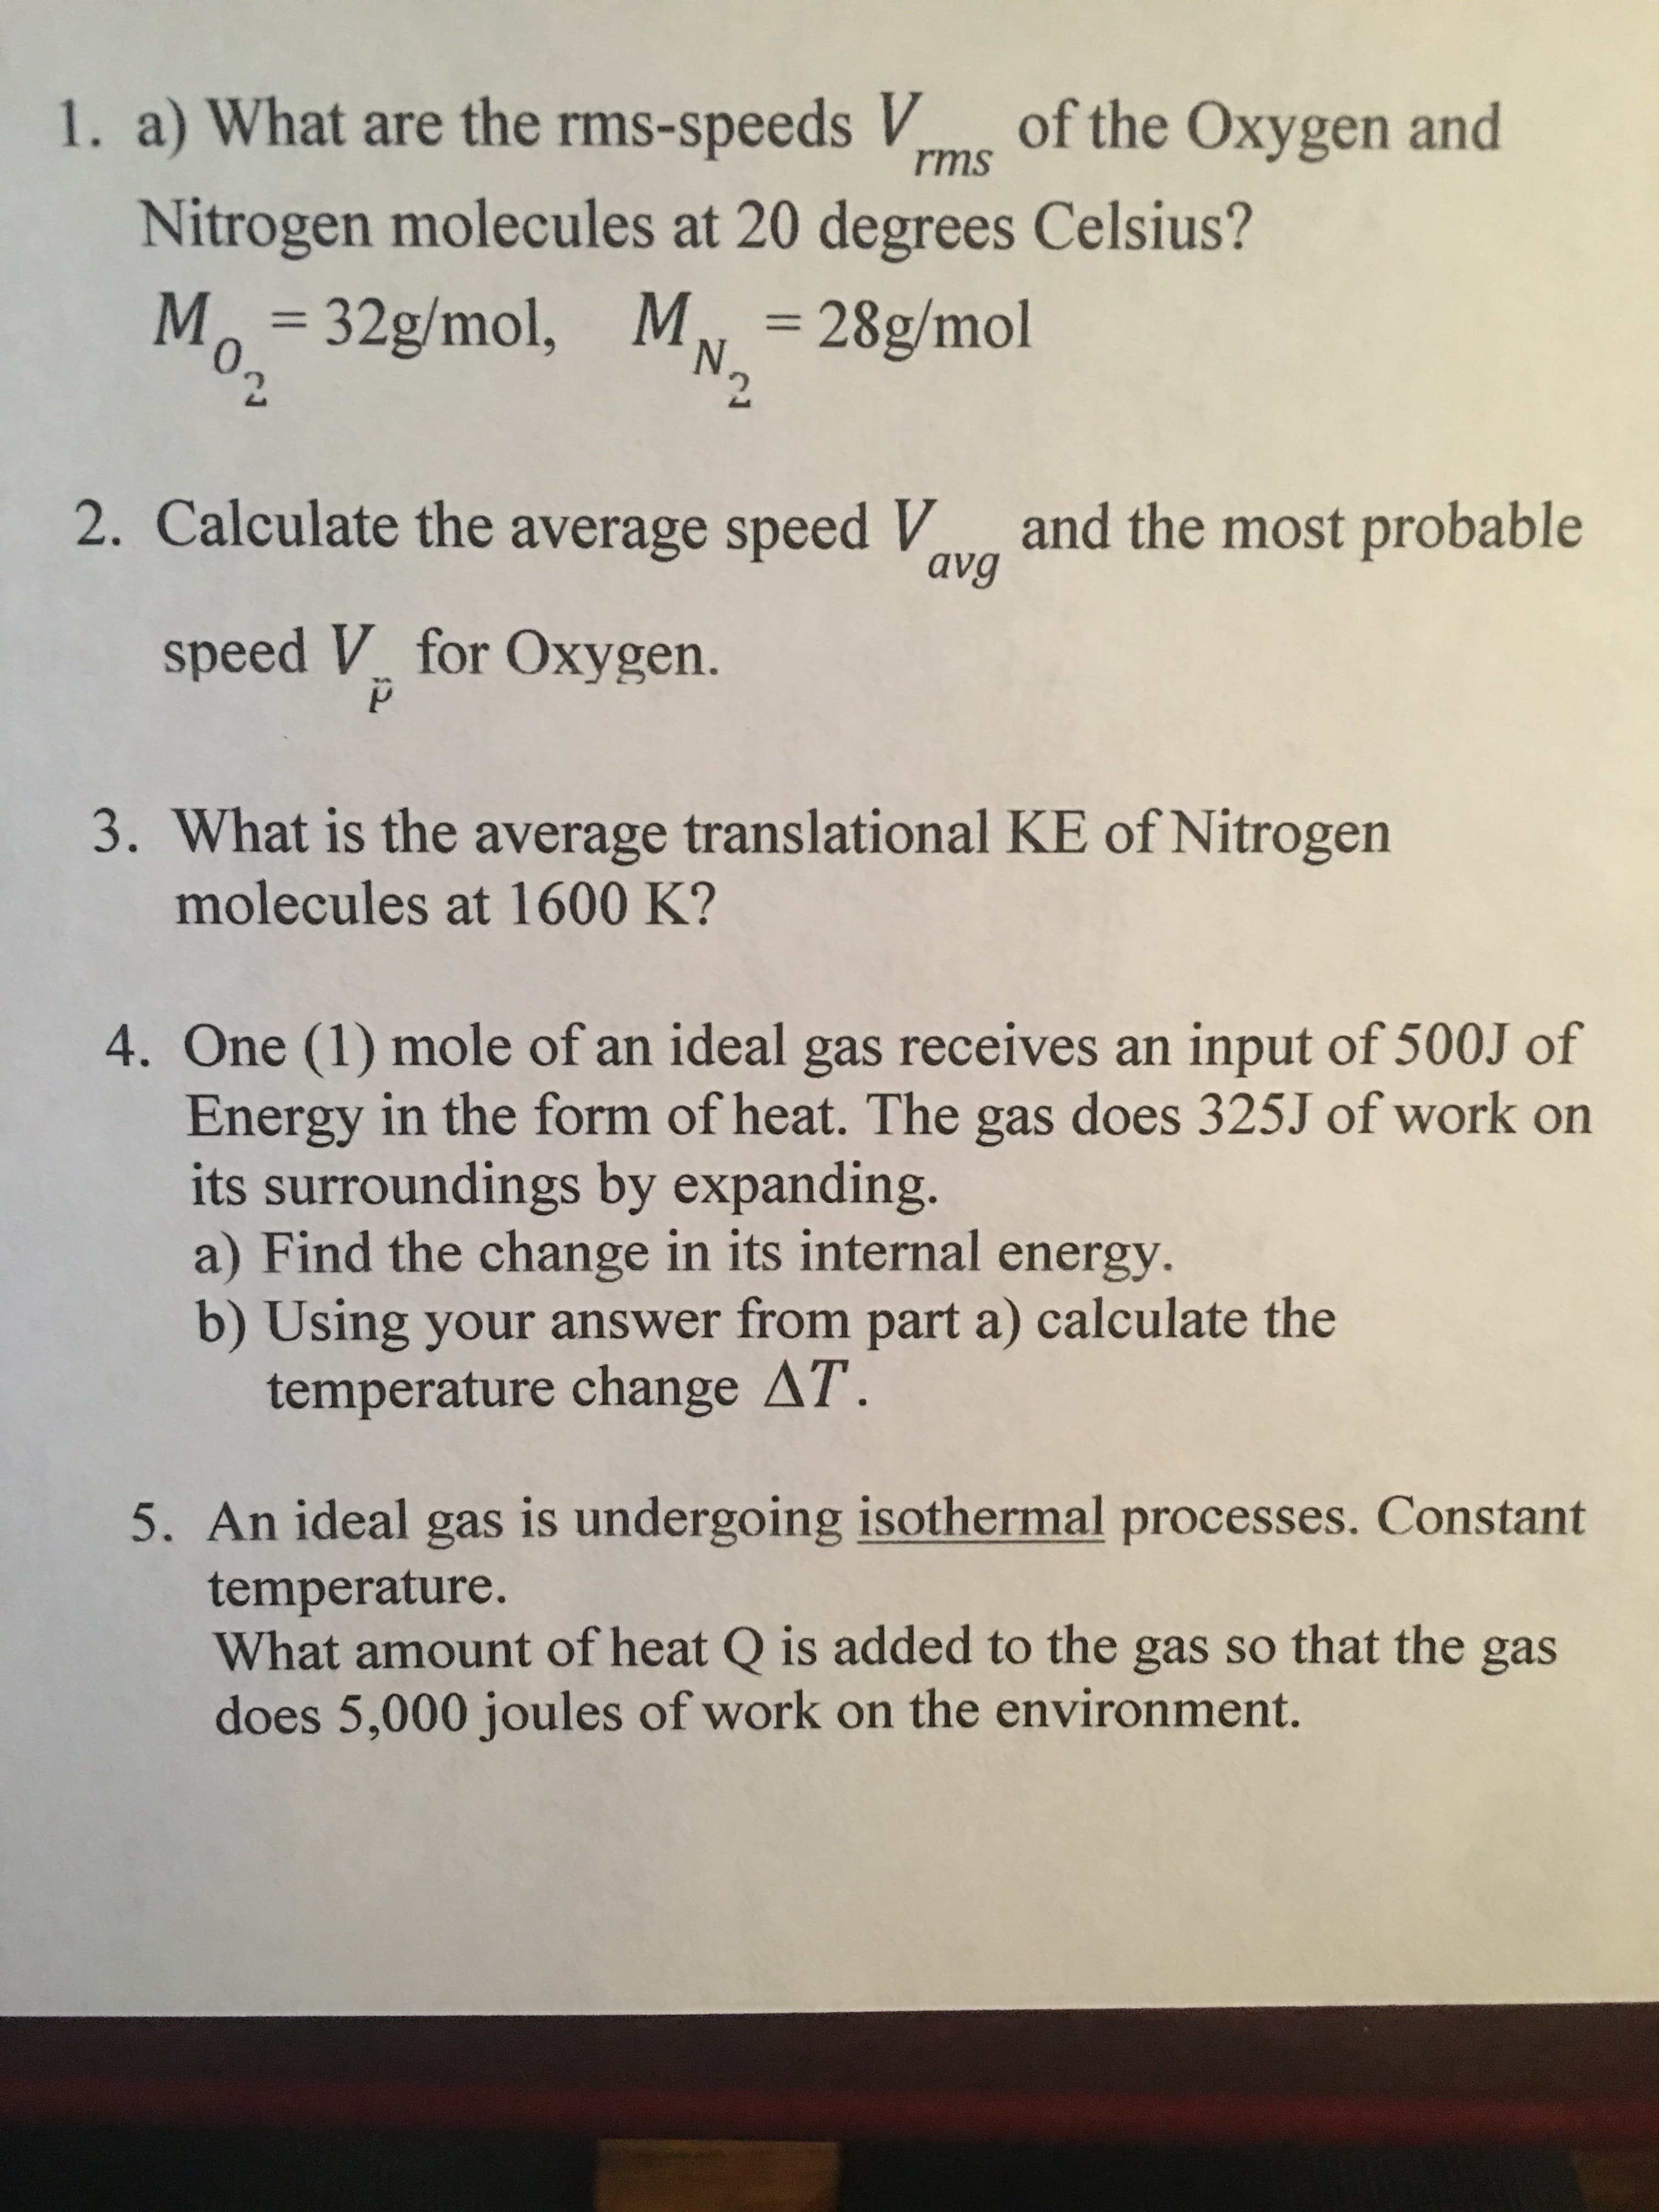 - An ideal gas is undergoing isothermal processes. Constant
temperature.
What amount of heat Q is added to the gas so that the gas
does 5,000 joules of work on the environment.
